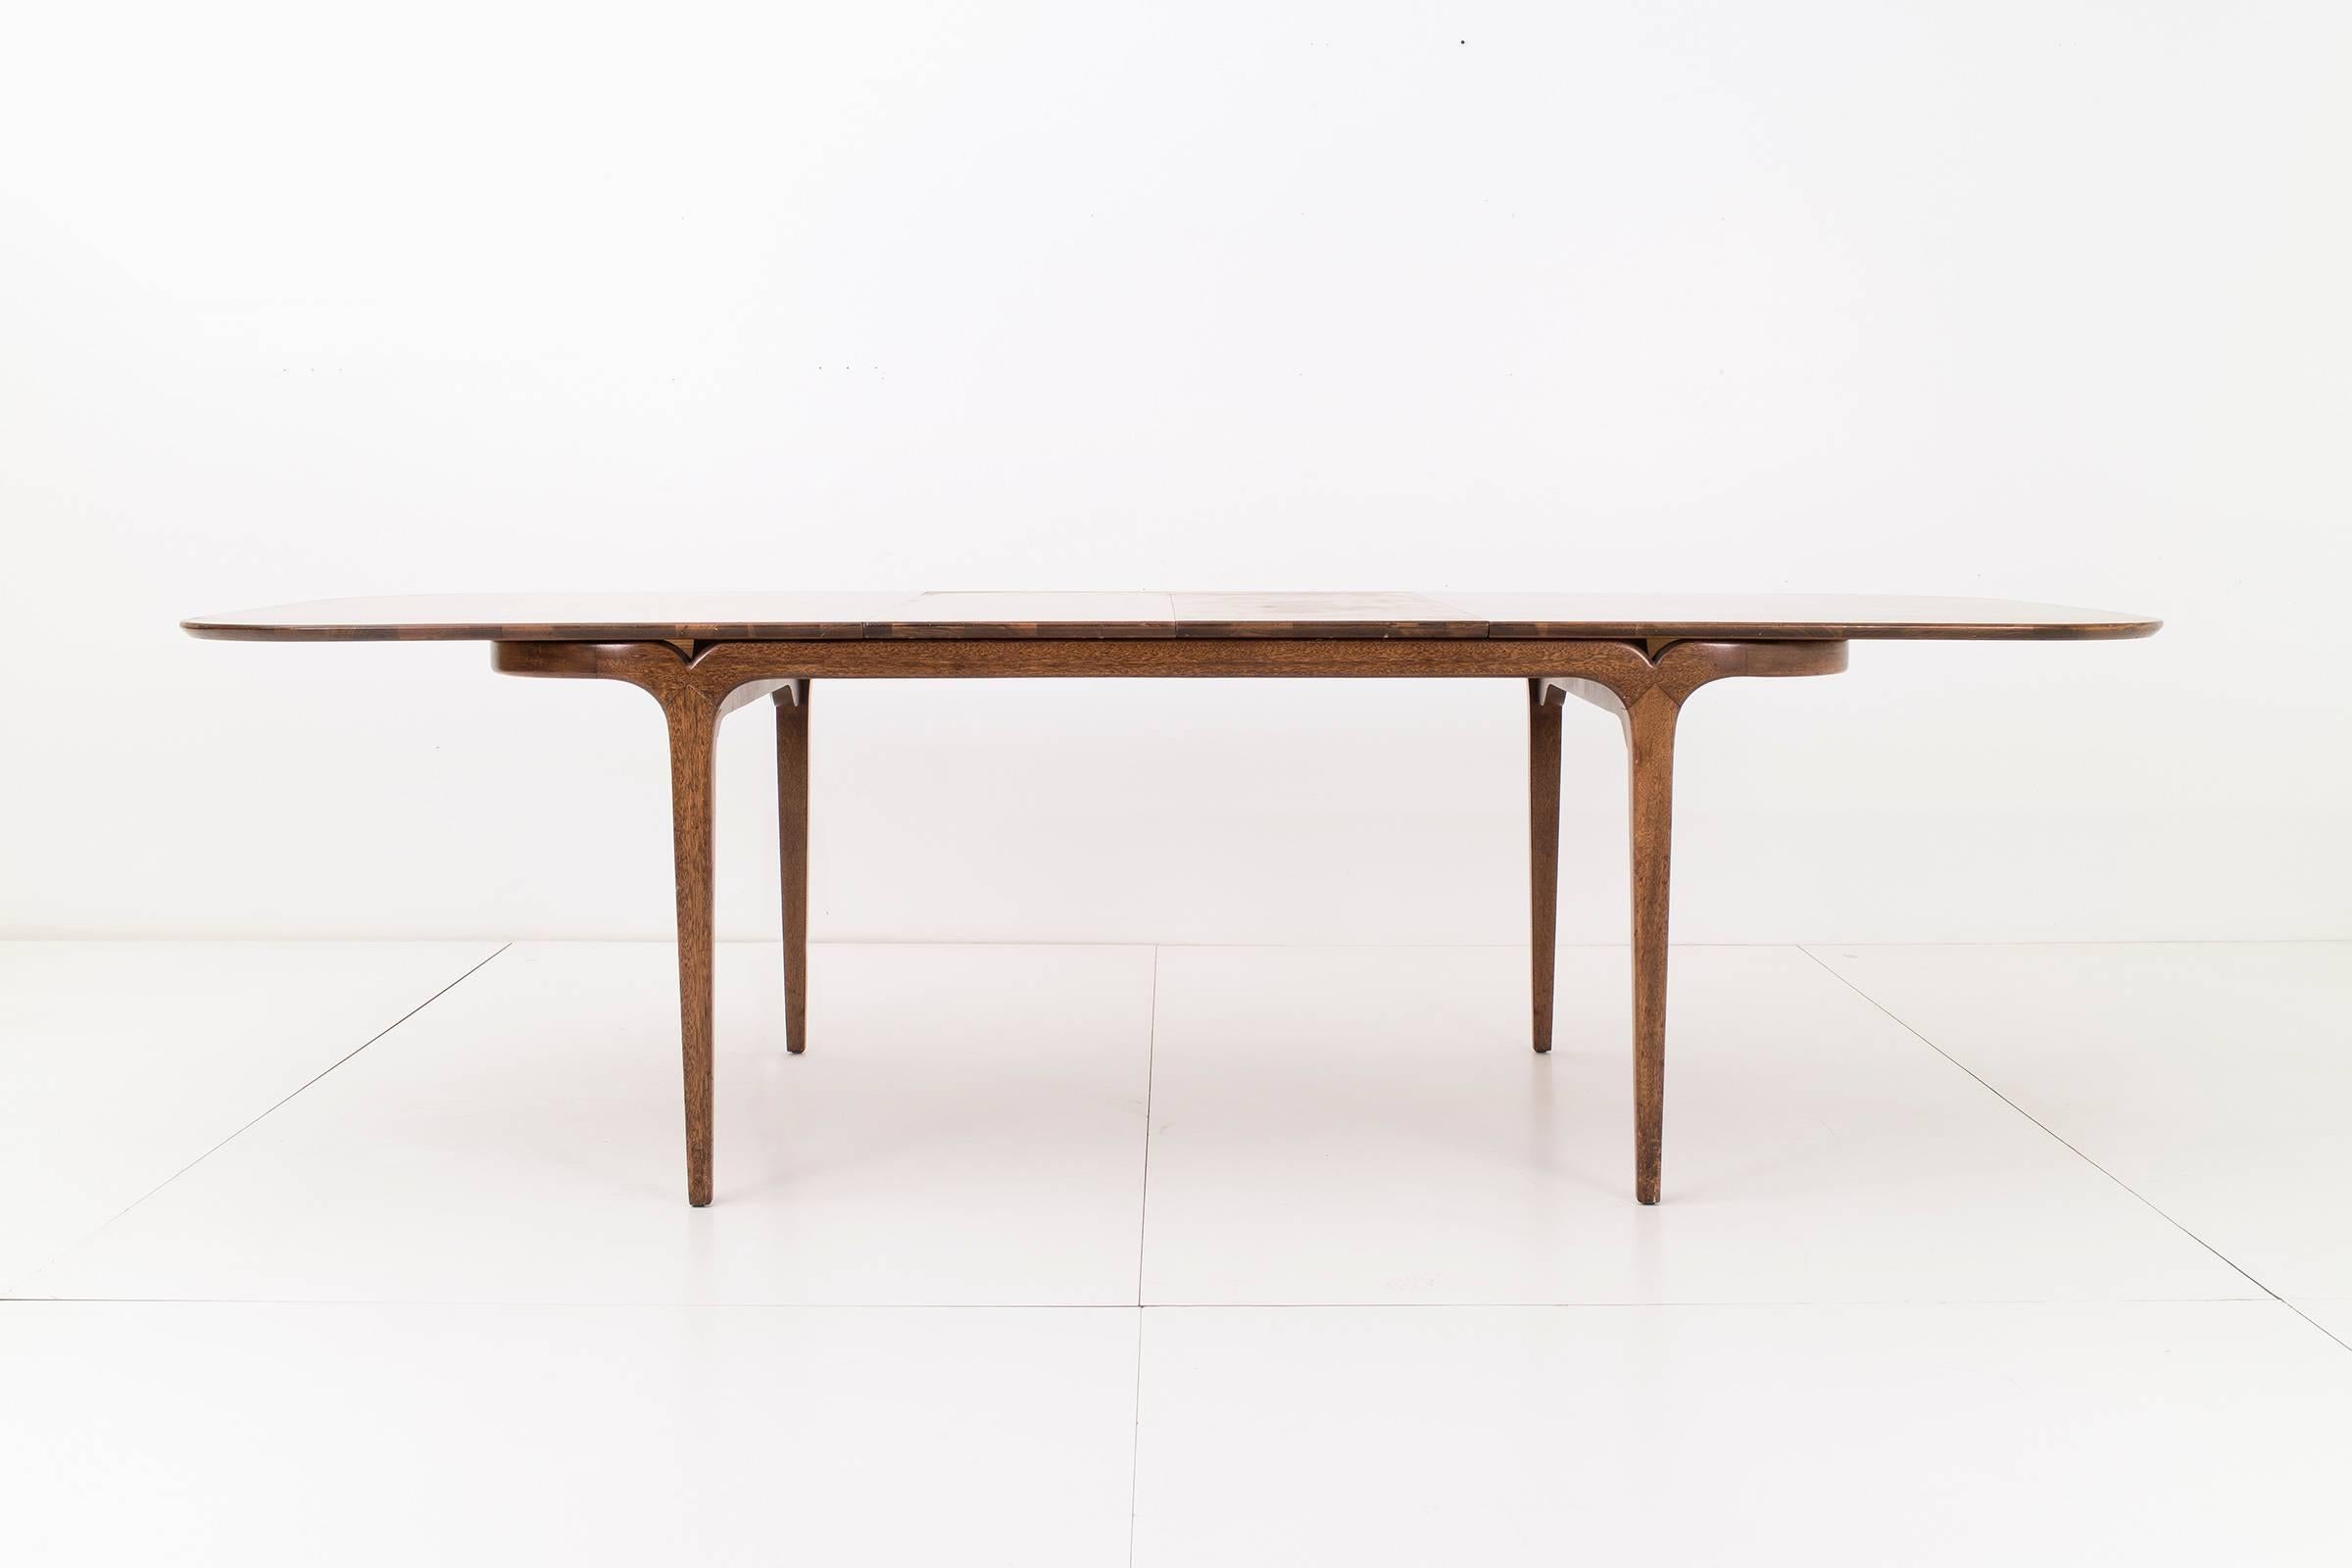 Mahogany dining table with rounded corners. Tabletop extends with two 15